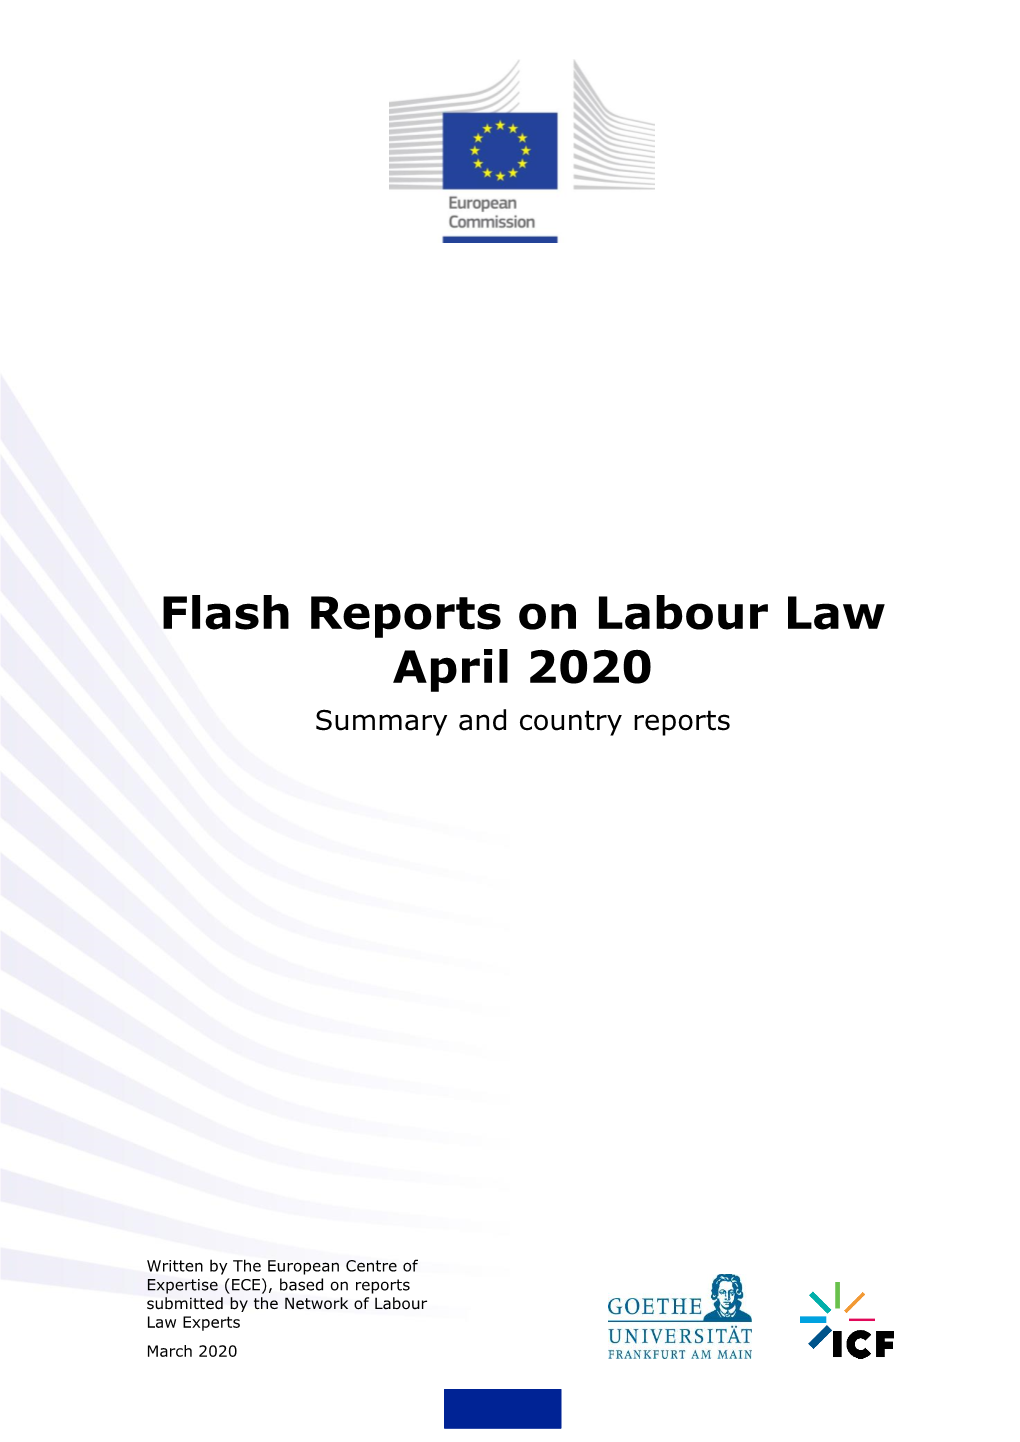 Flash Reports on Labour Law April 2020 Summary and Country Reports